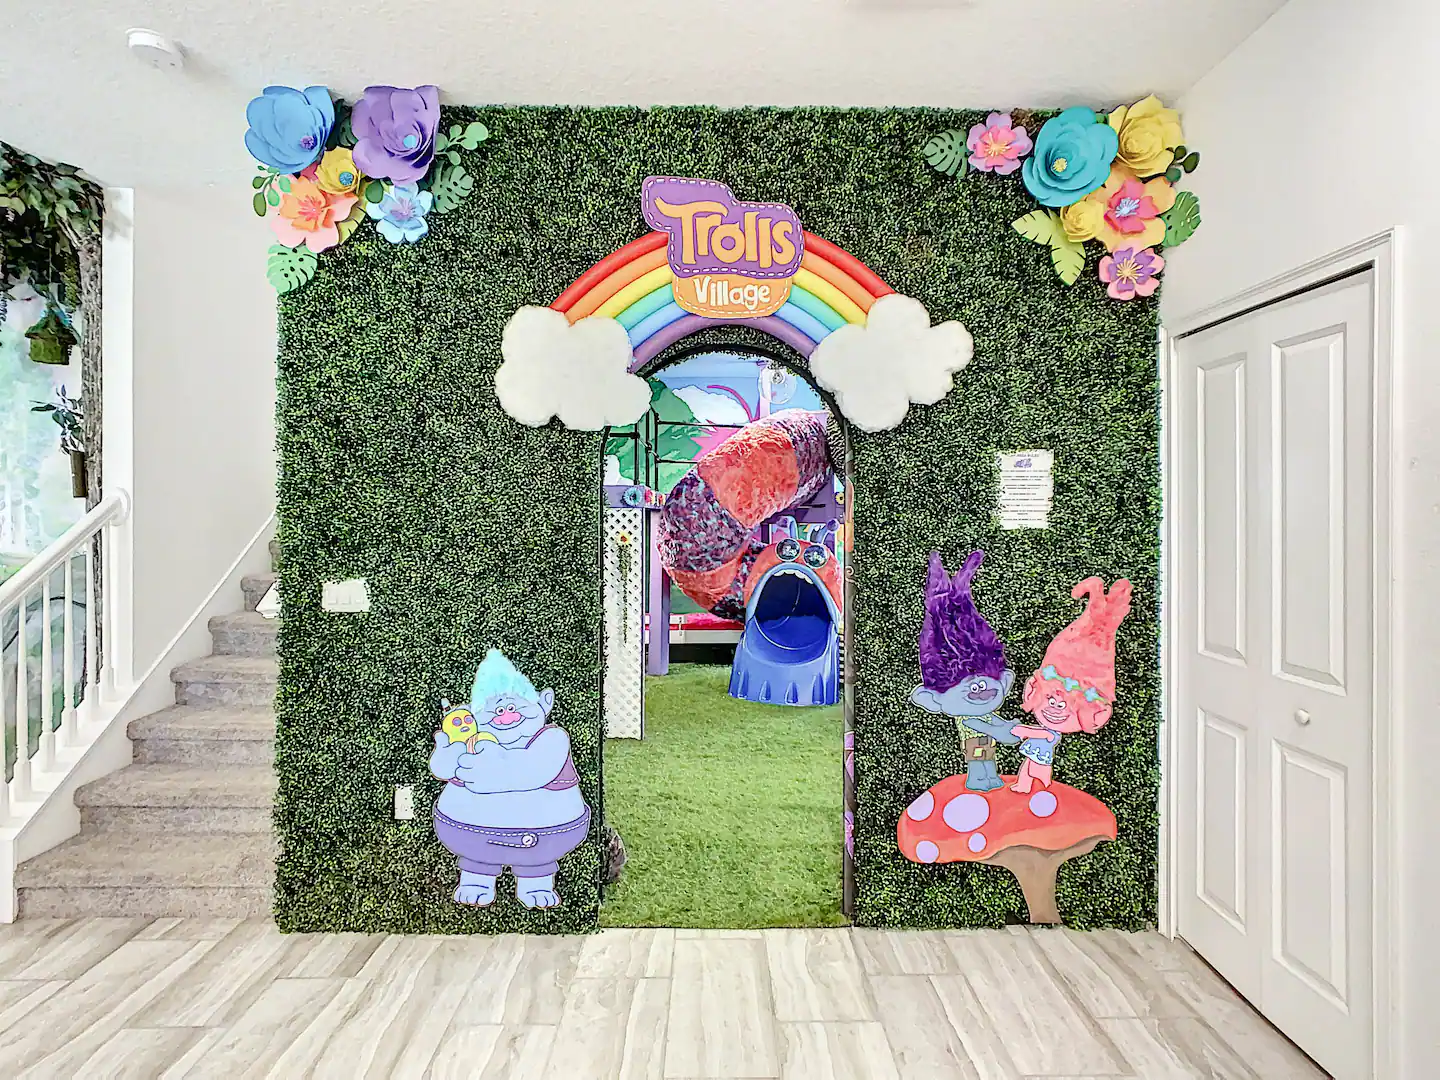 Slide the door open to enter the wonderful and fun-filled Trolls Village!!!